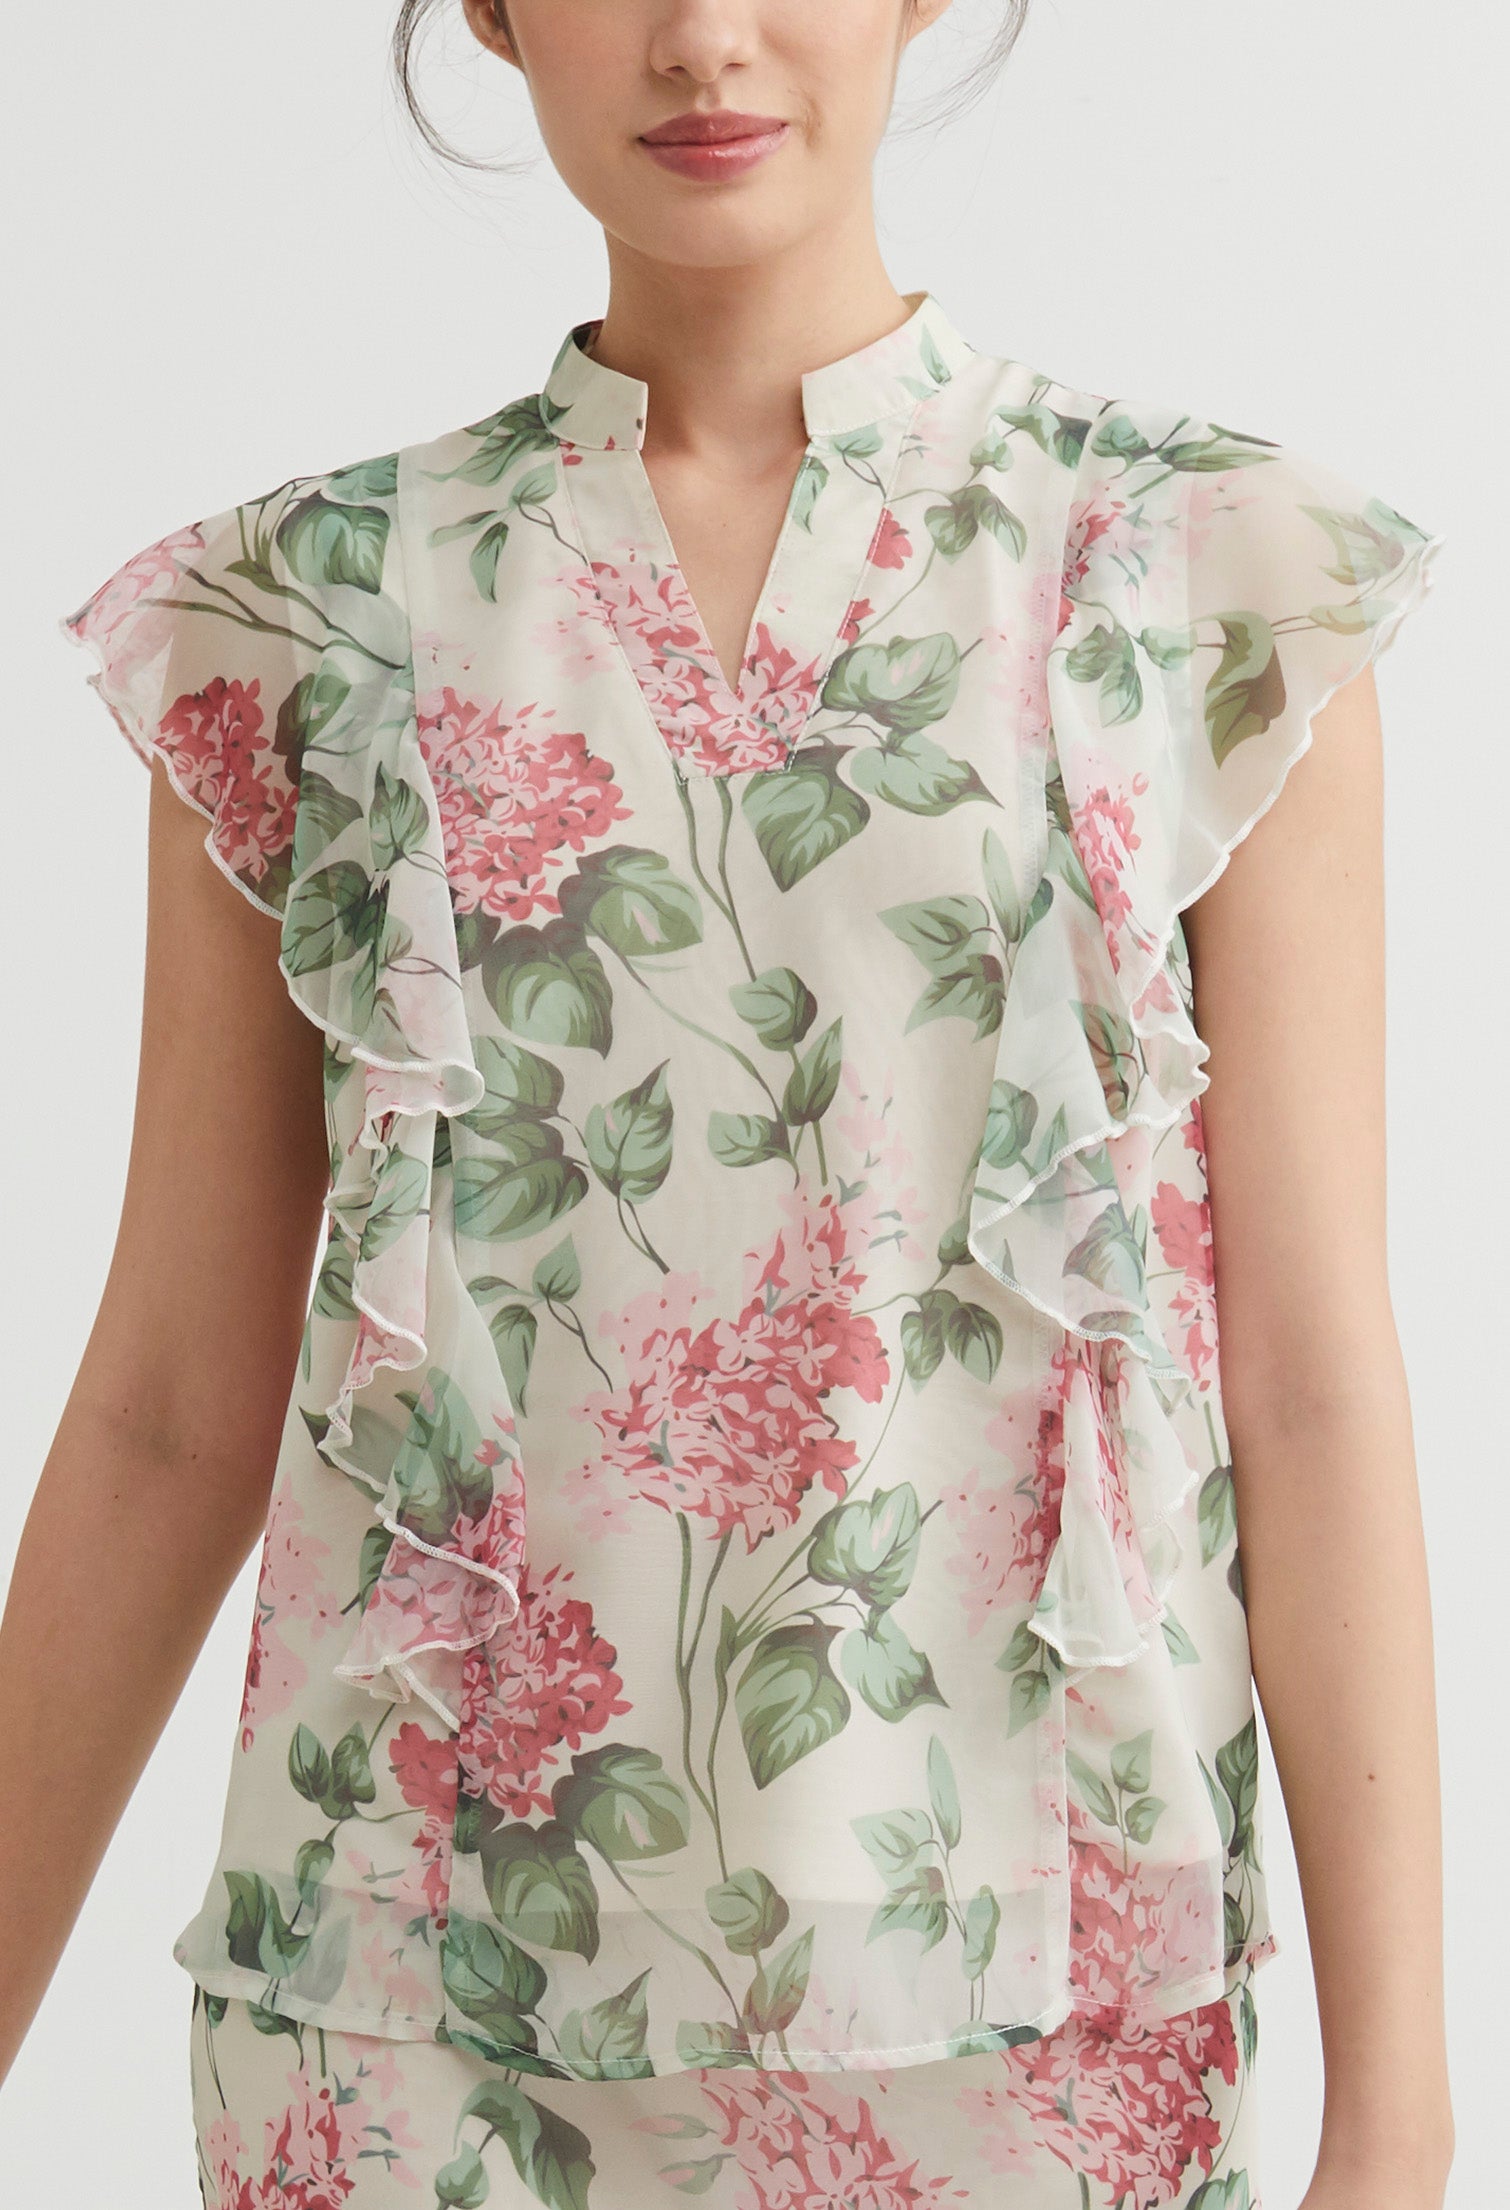 Sweetheart Floral Cap Sleeve Blouse